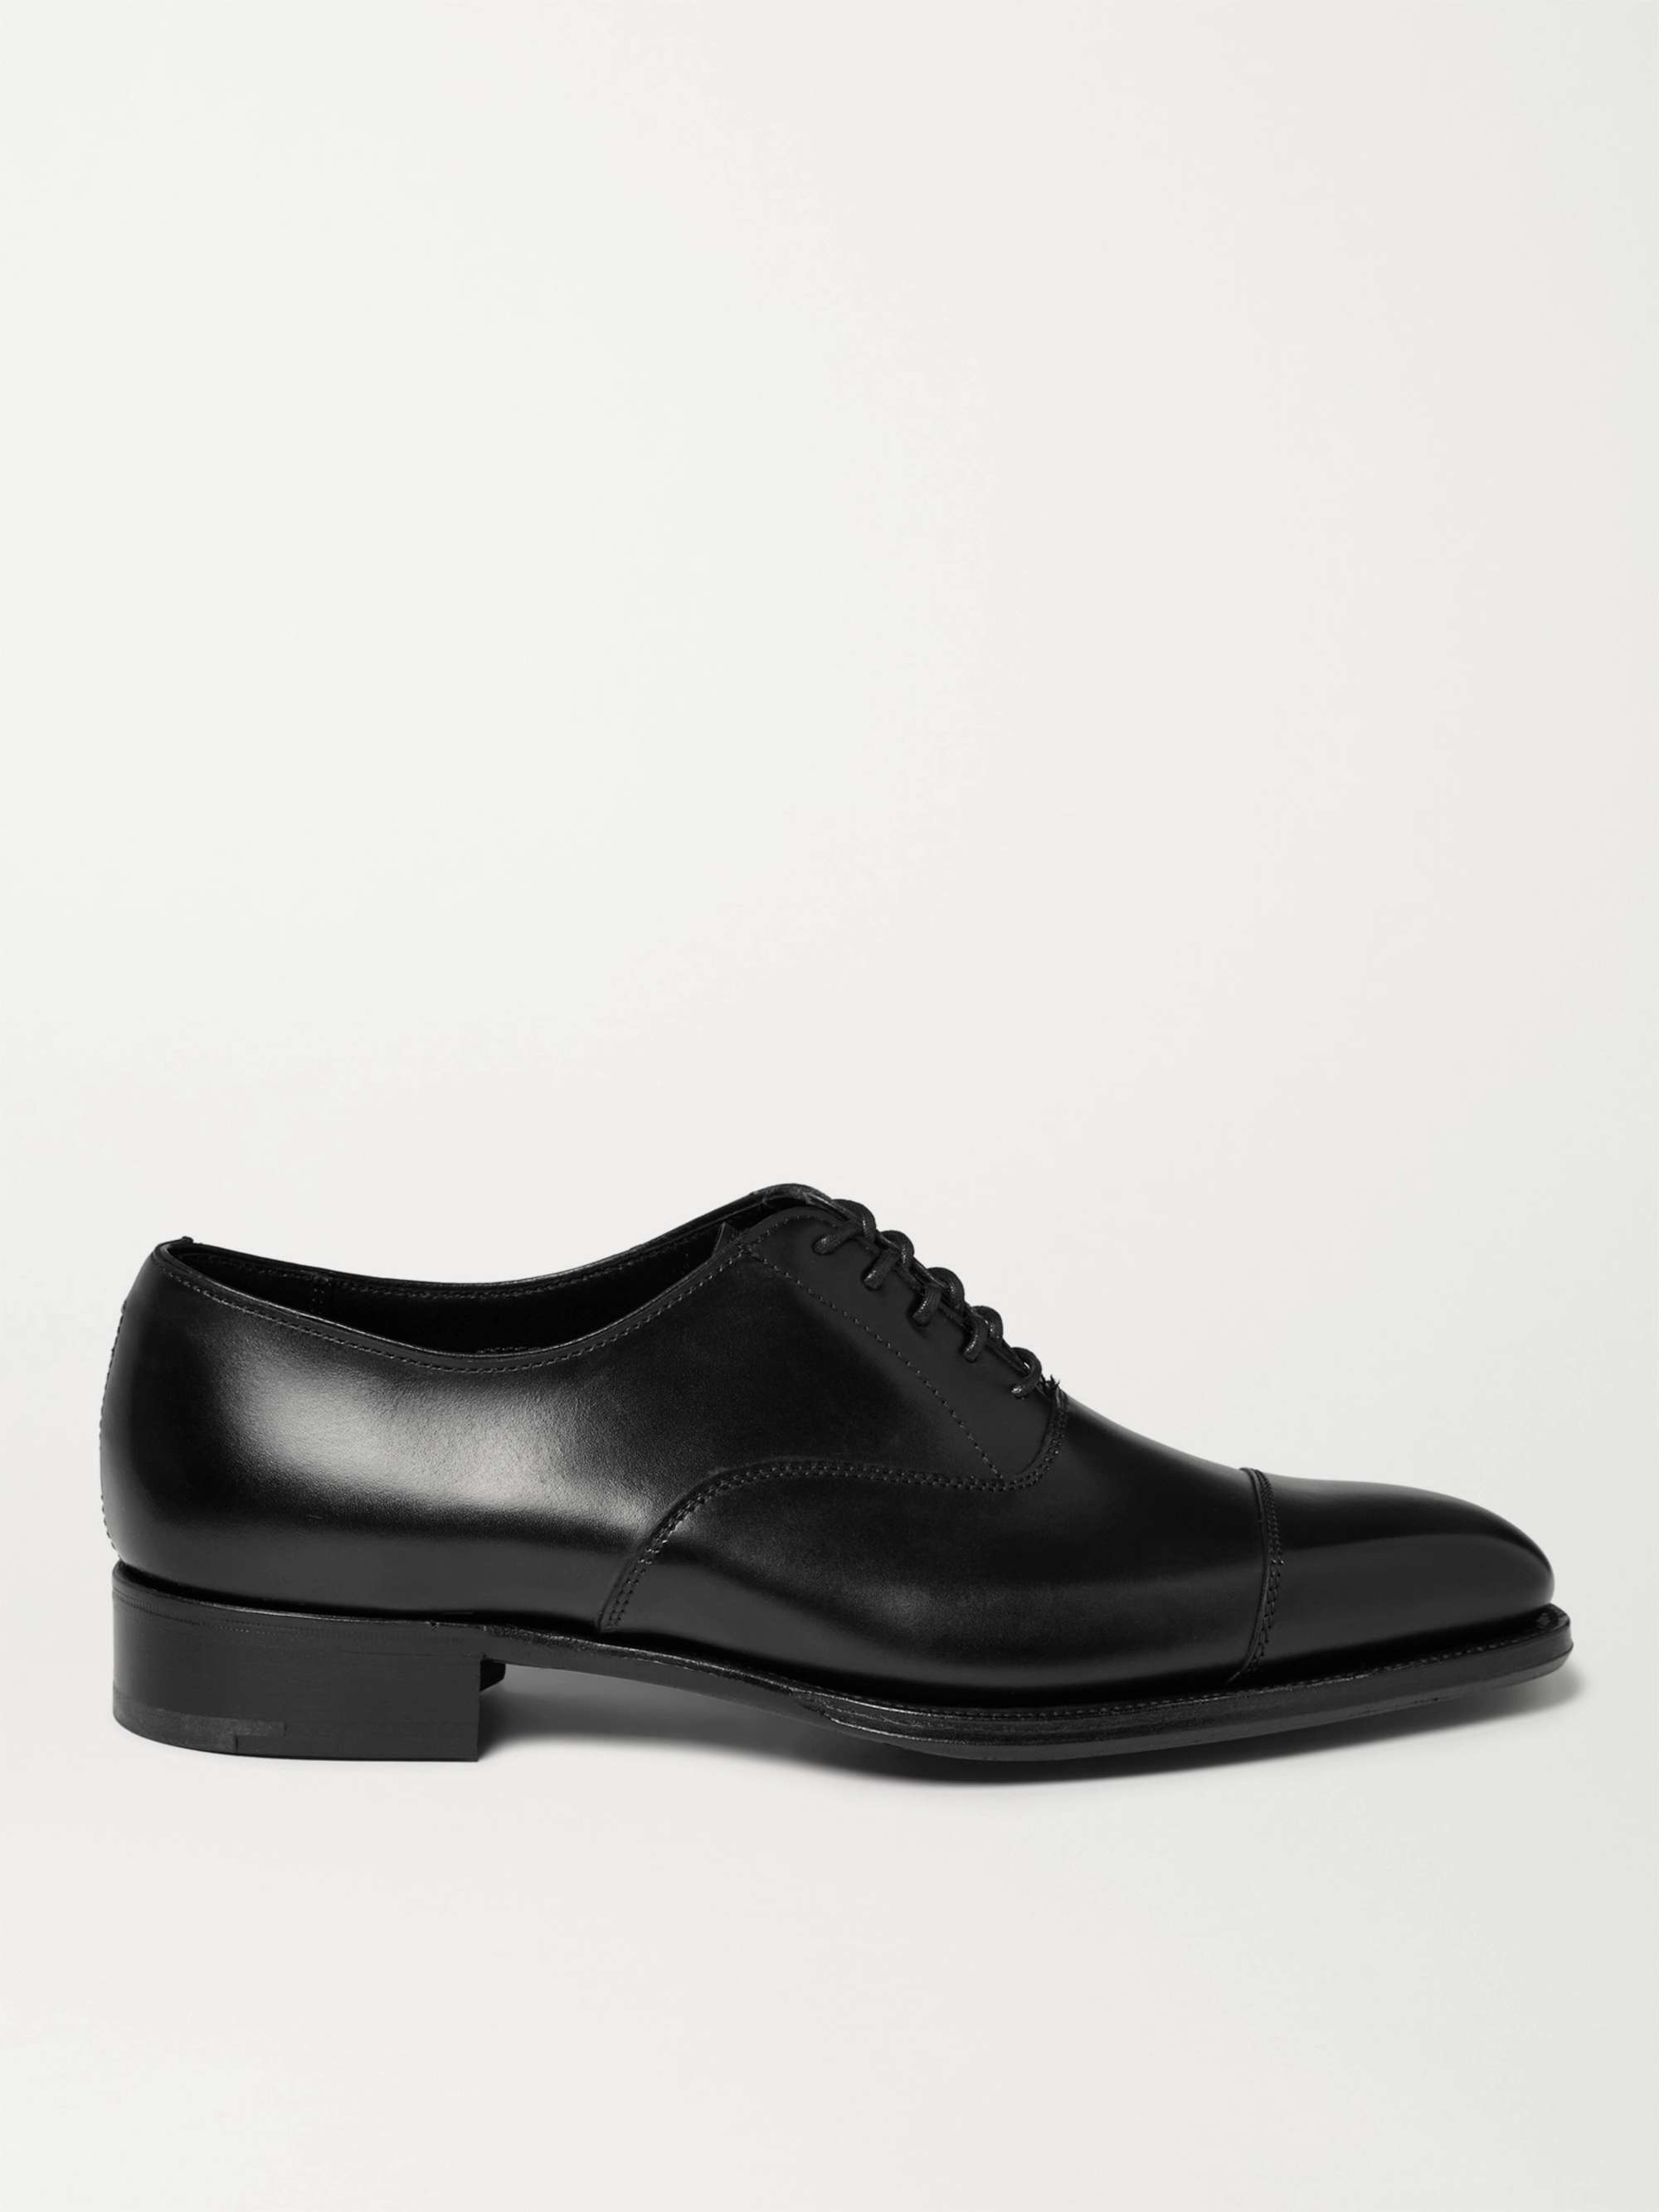 KINGSMAN + George Cleverley Leather Oxford Shoes | MR PORTER